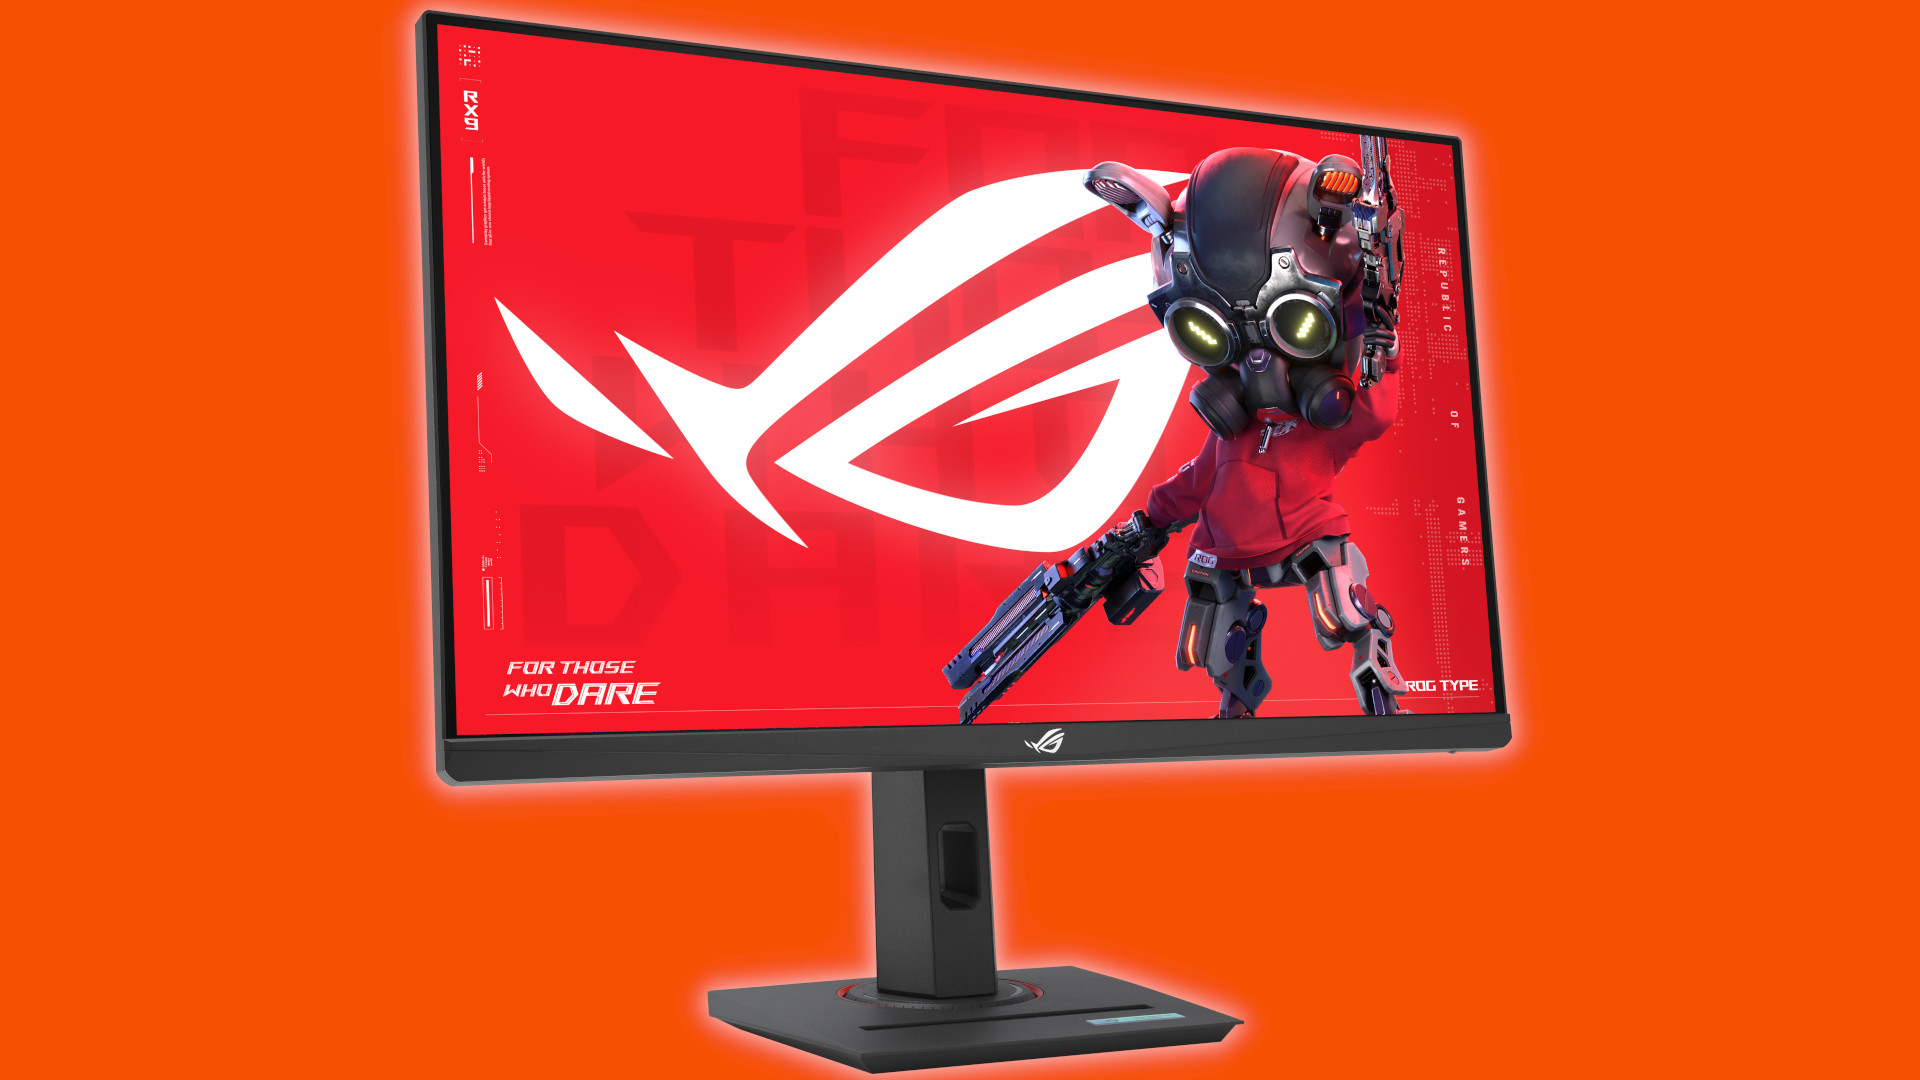 New Asus ROG gaming monitors want to get groovy with your smartphone